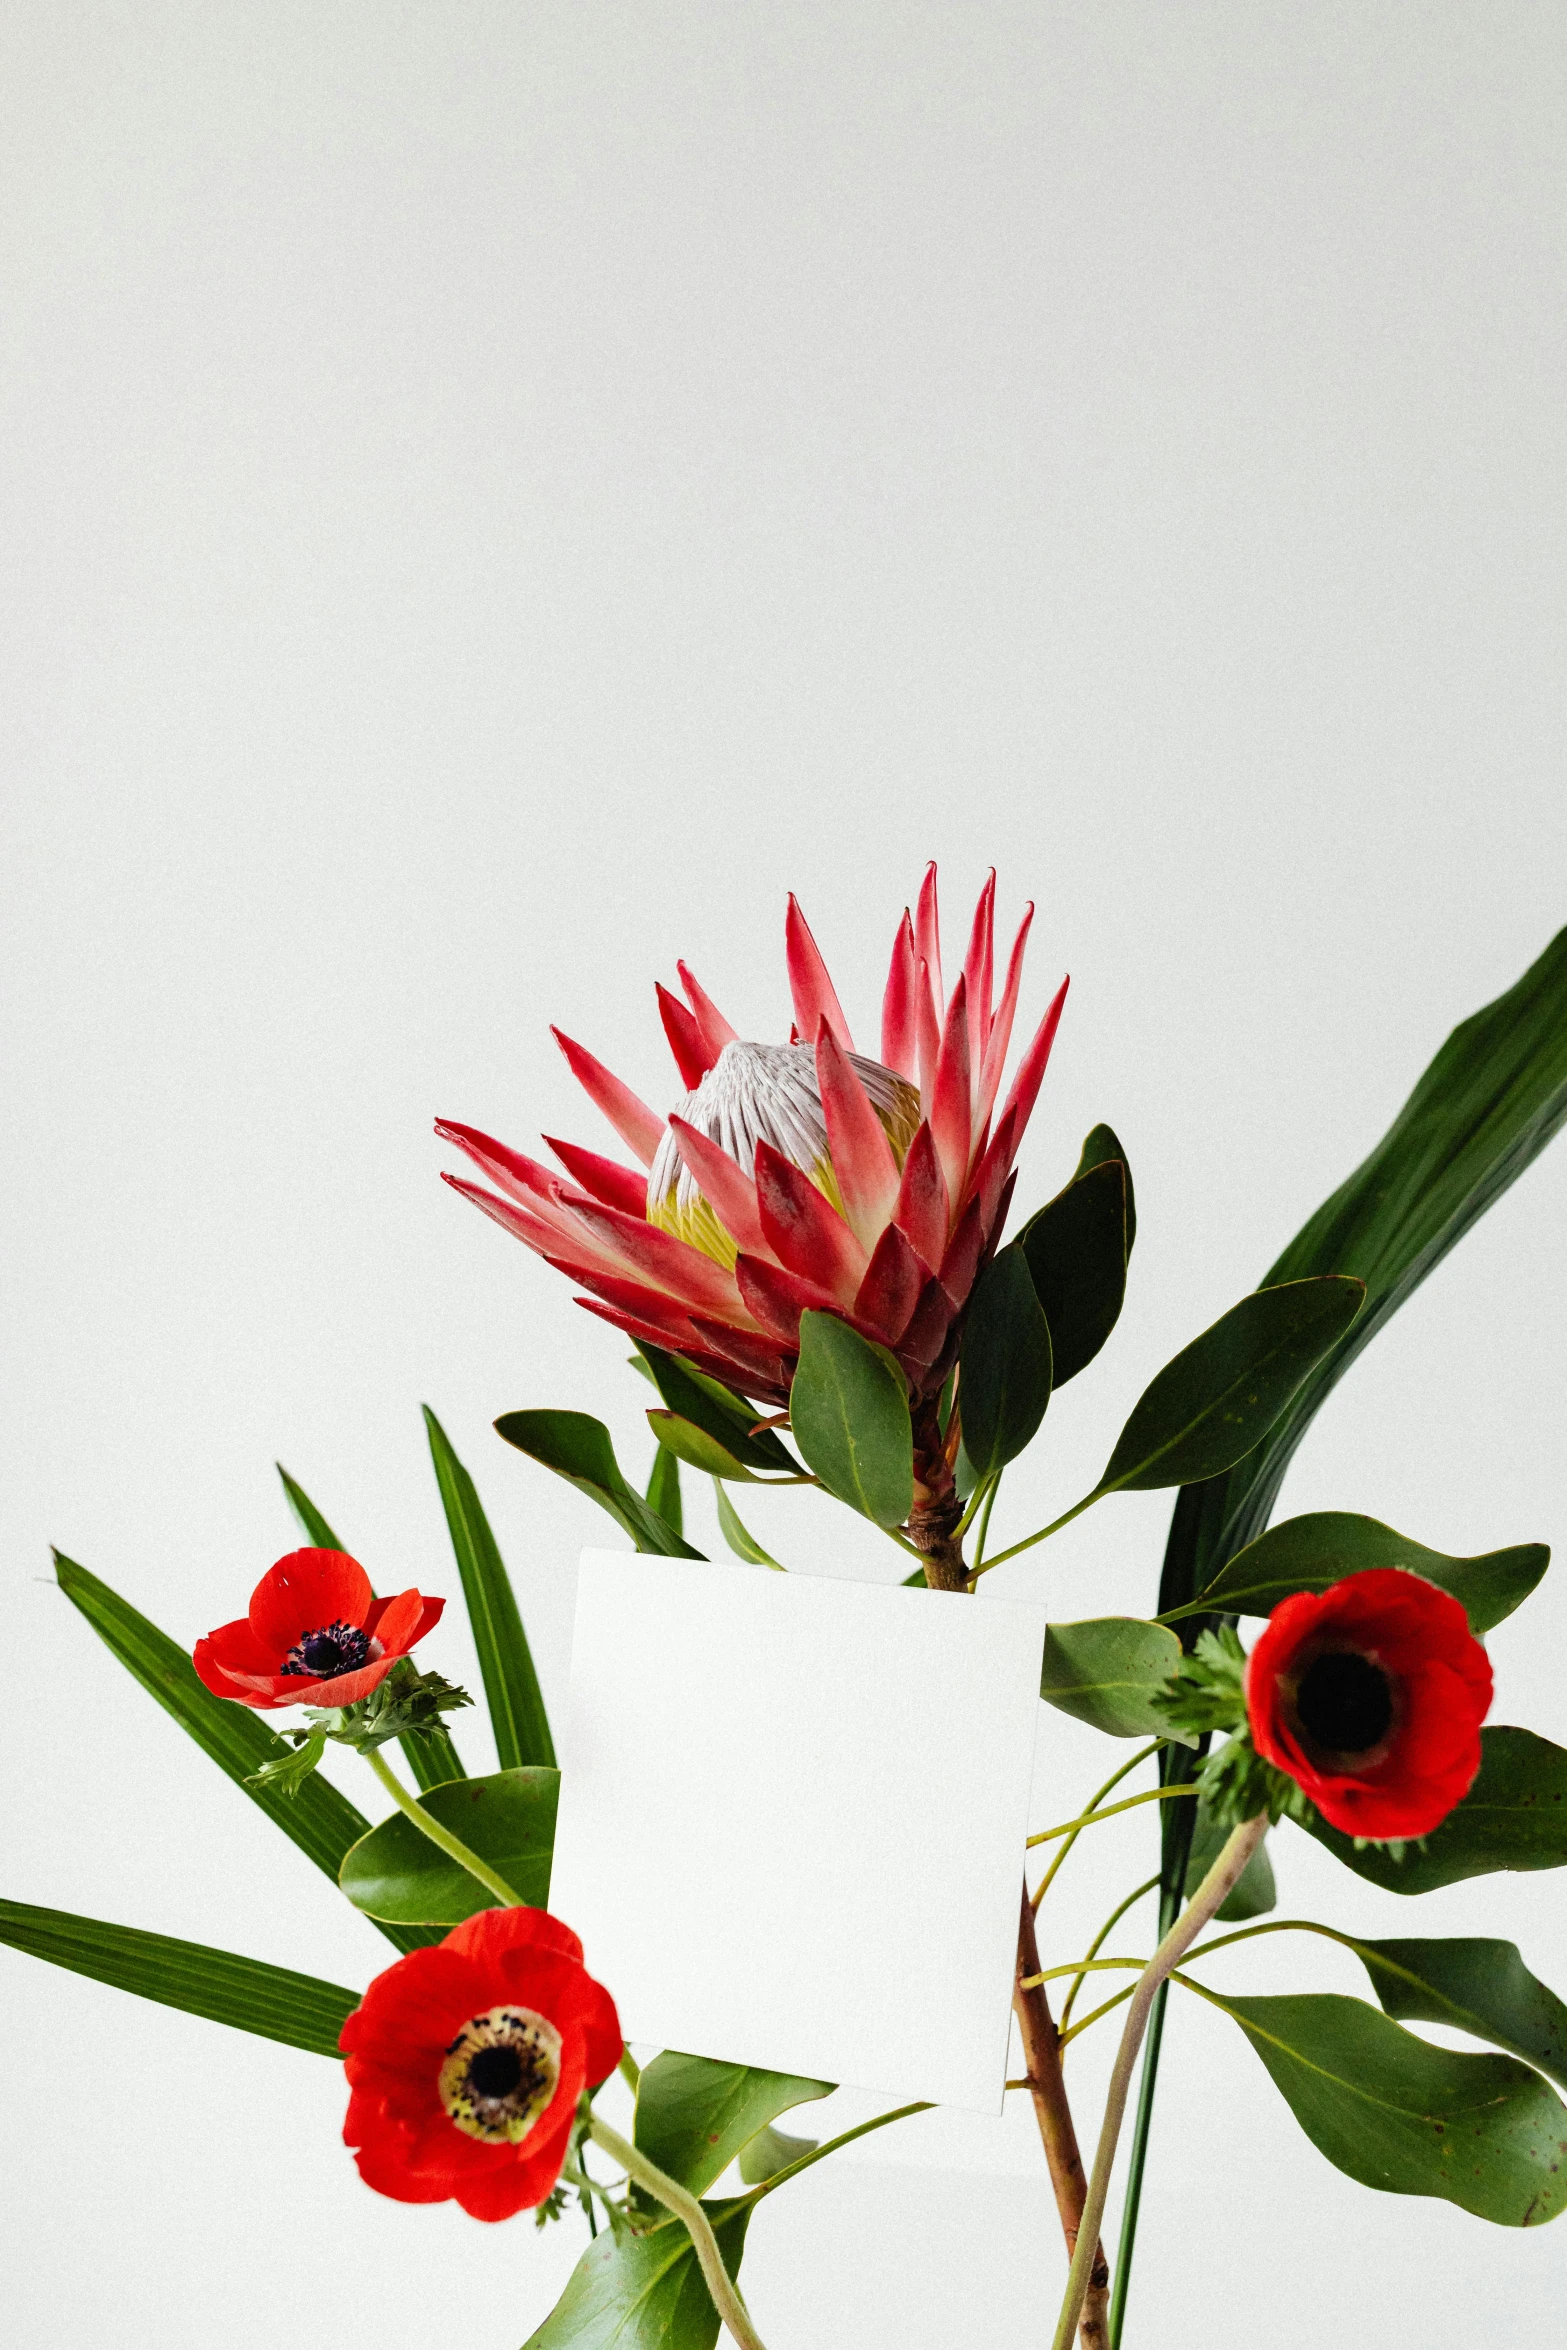 a vase filled with red flowers and green leaves, bromeliads, dramatic product shot, white vase, red poppies